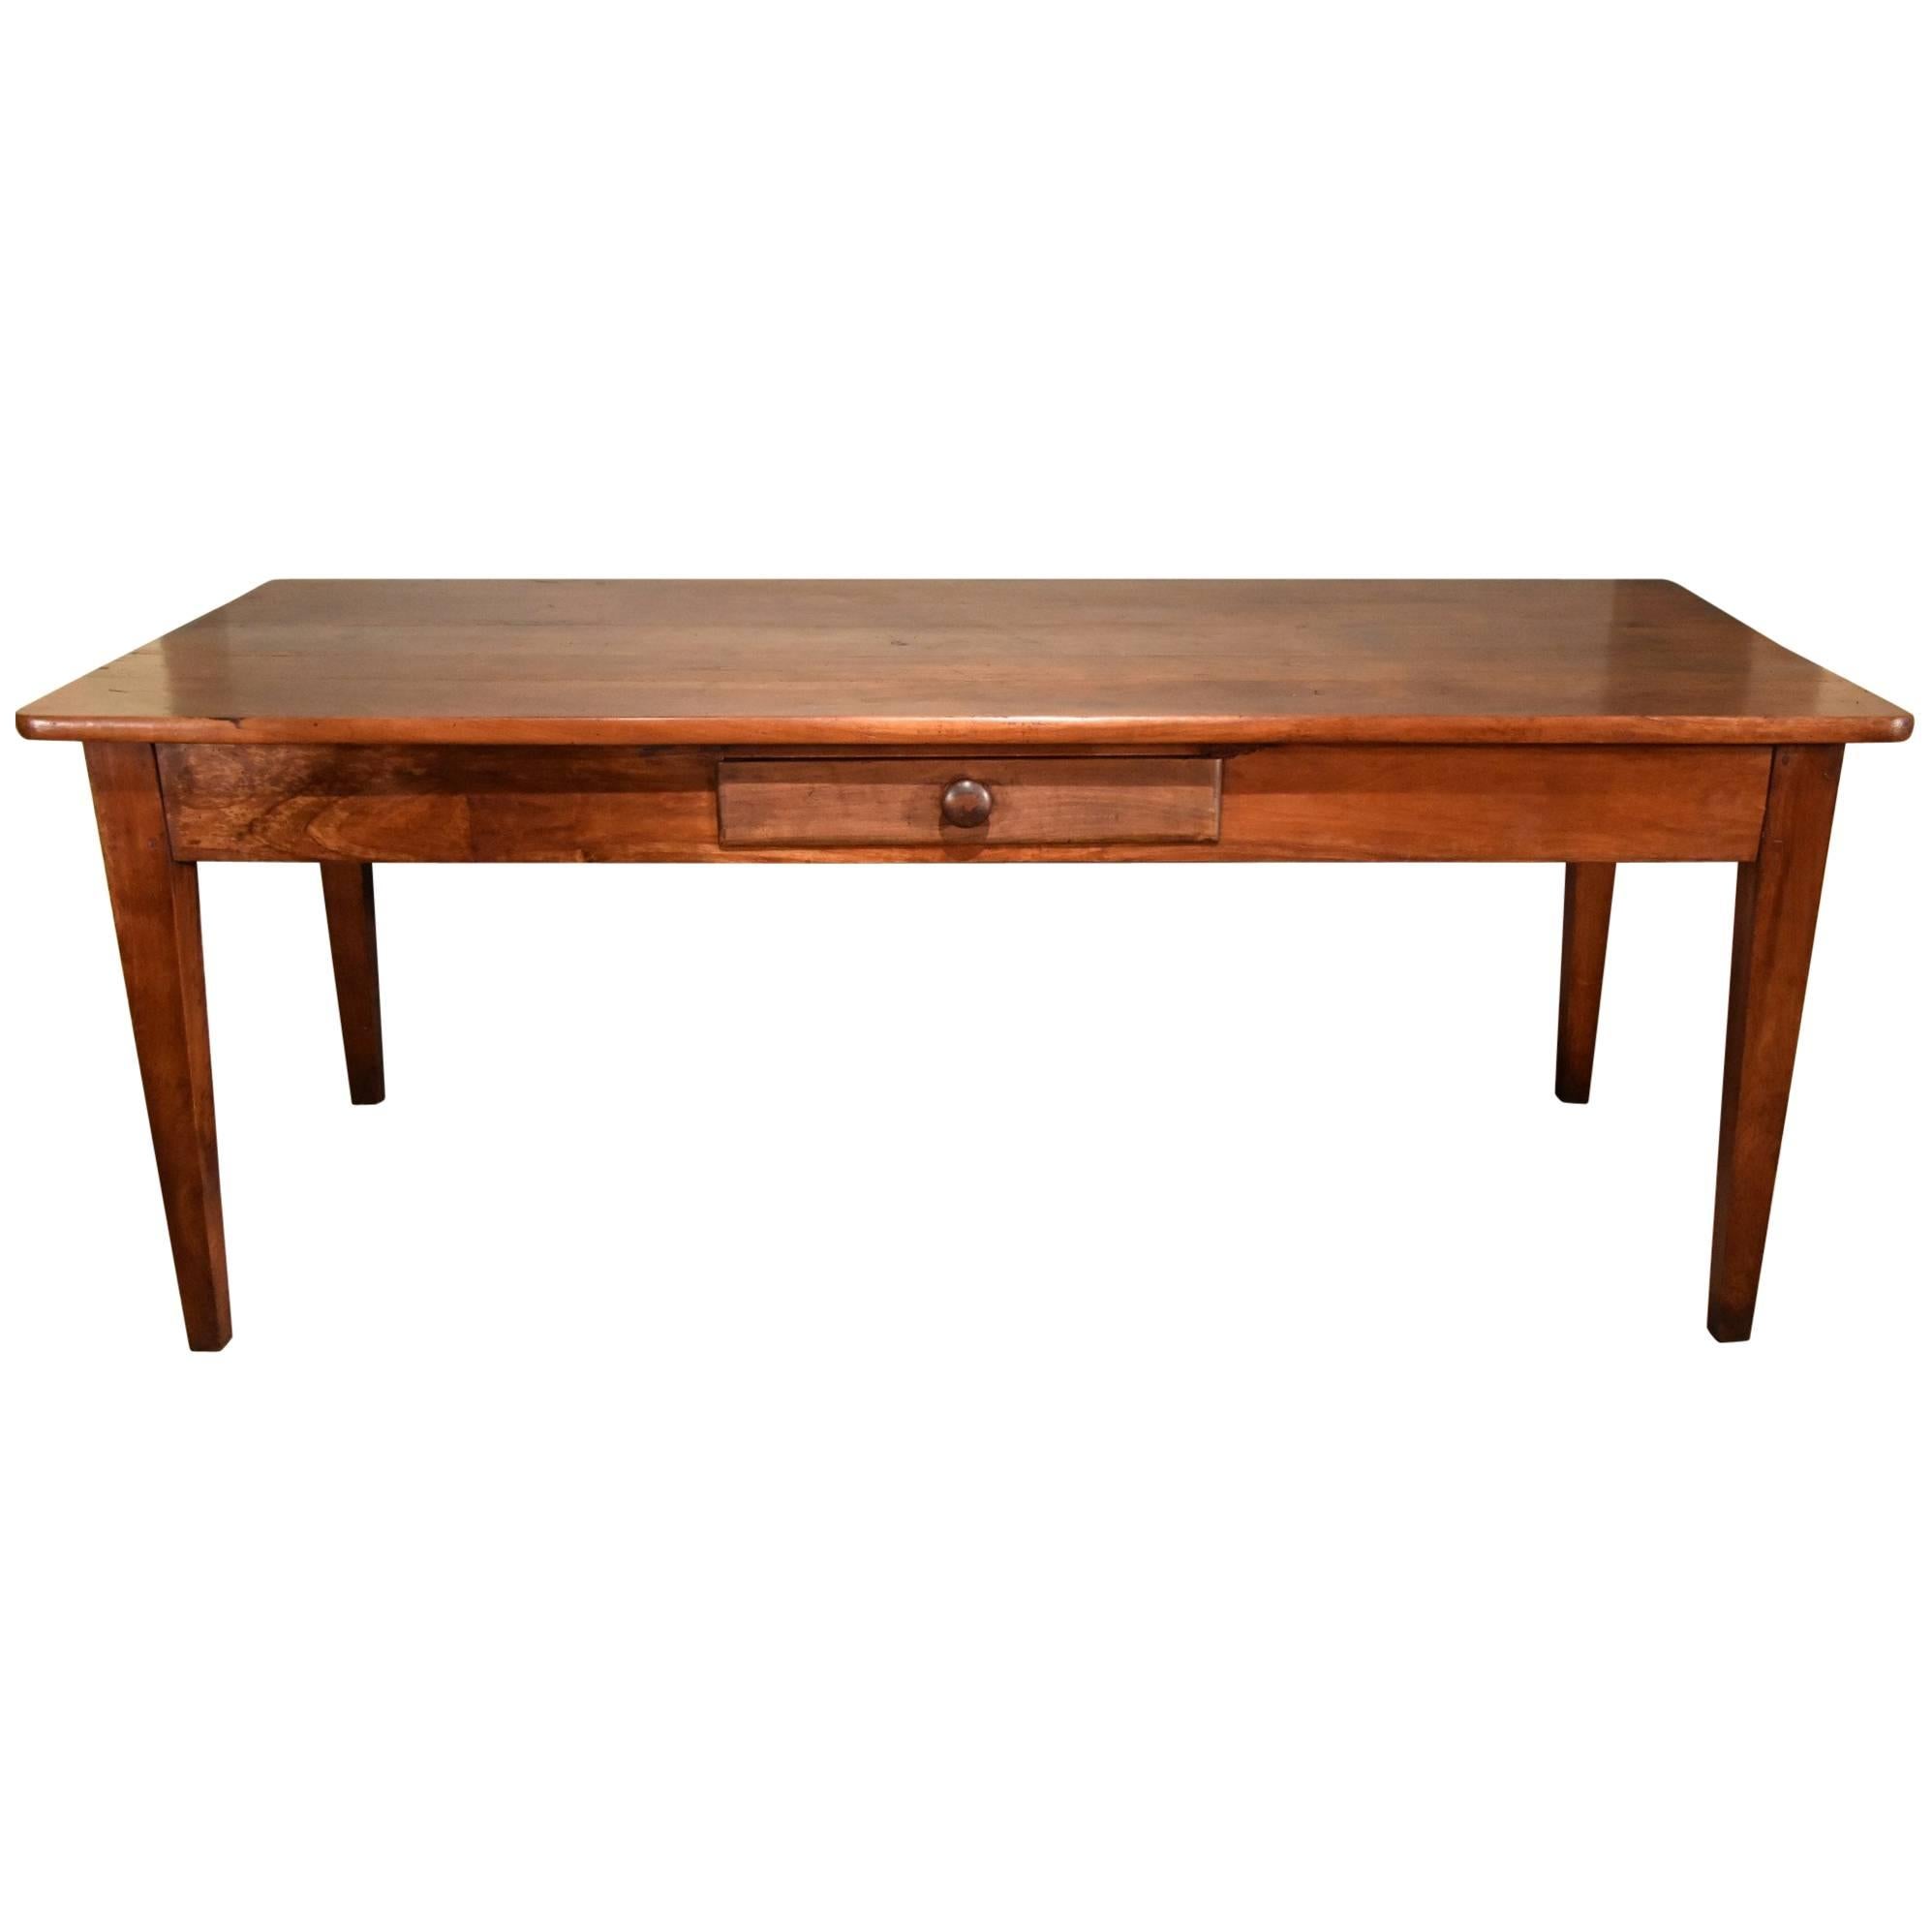 French Provincial Mid-19th Century Cherrywood Farmhouse Table